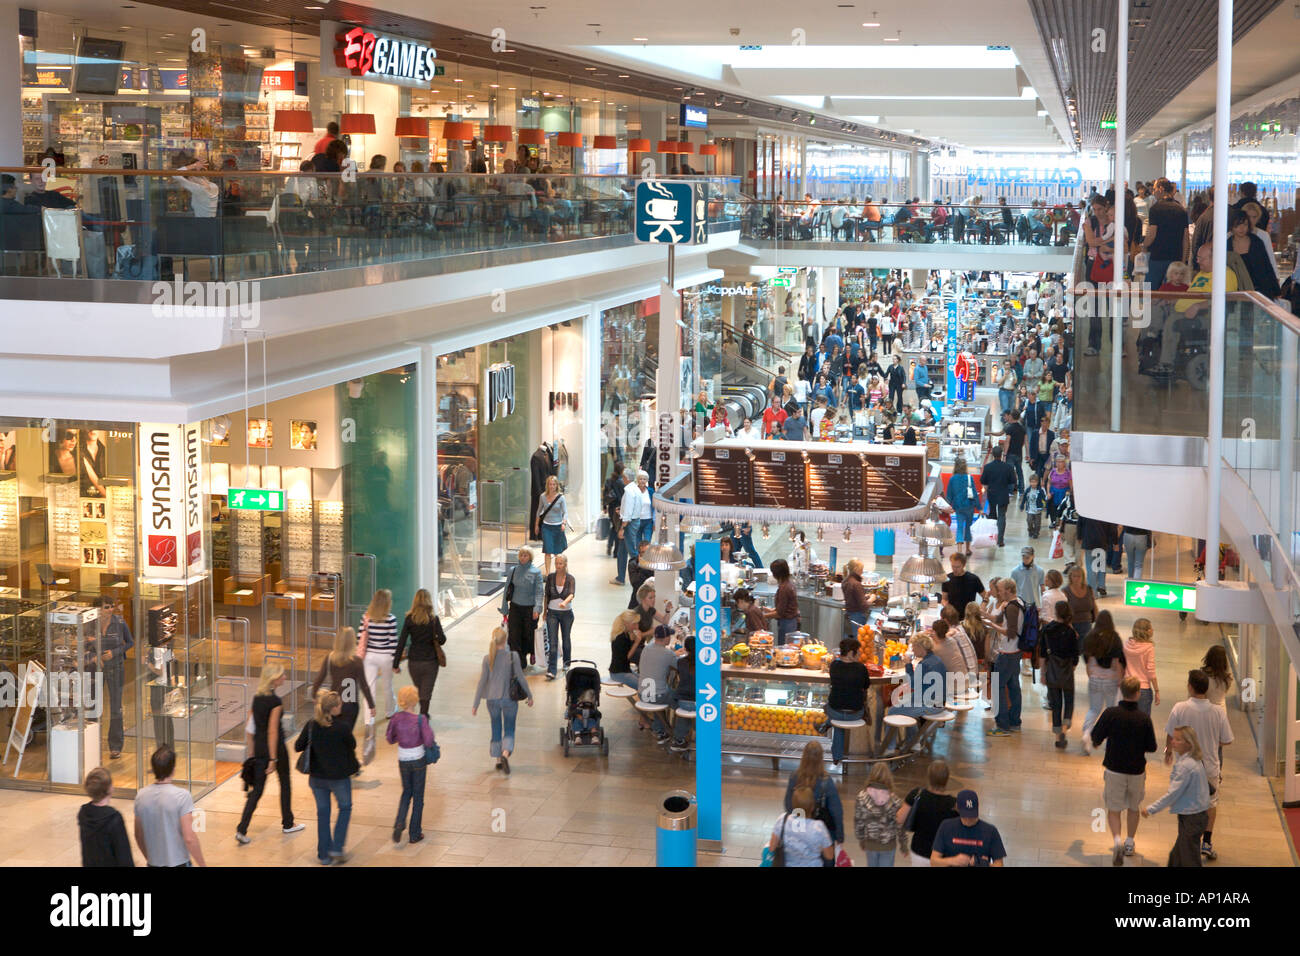 SWEDEN STOCKHOLM SHOPPING MALL GALLERIAN Stock Photo: 8938745 - Alamy